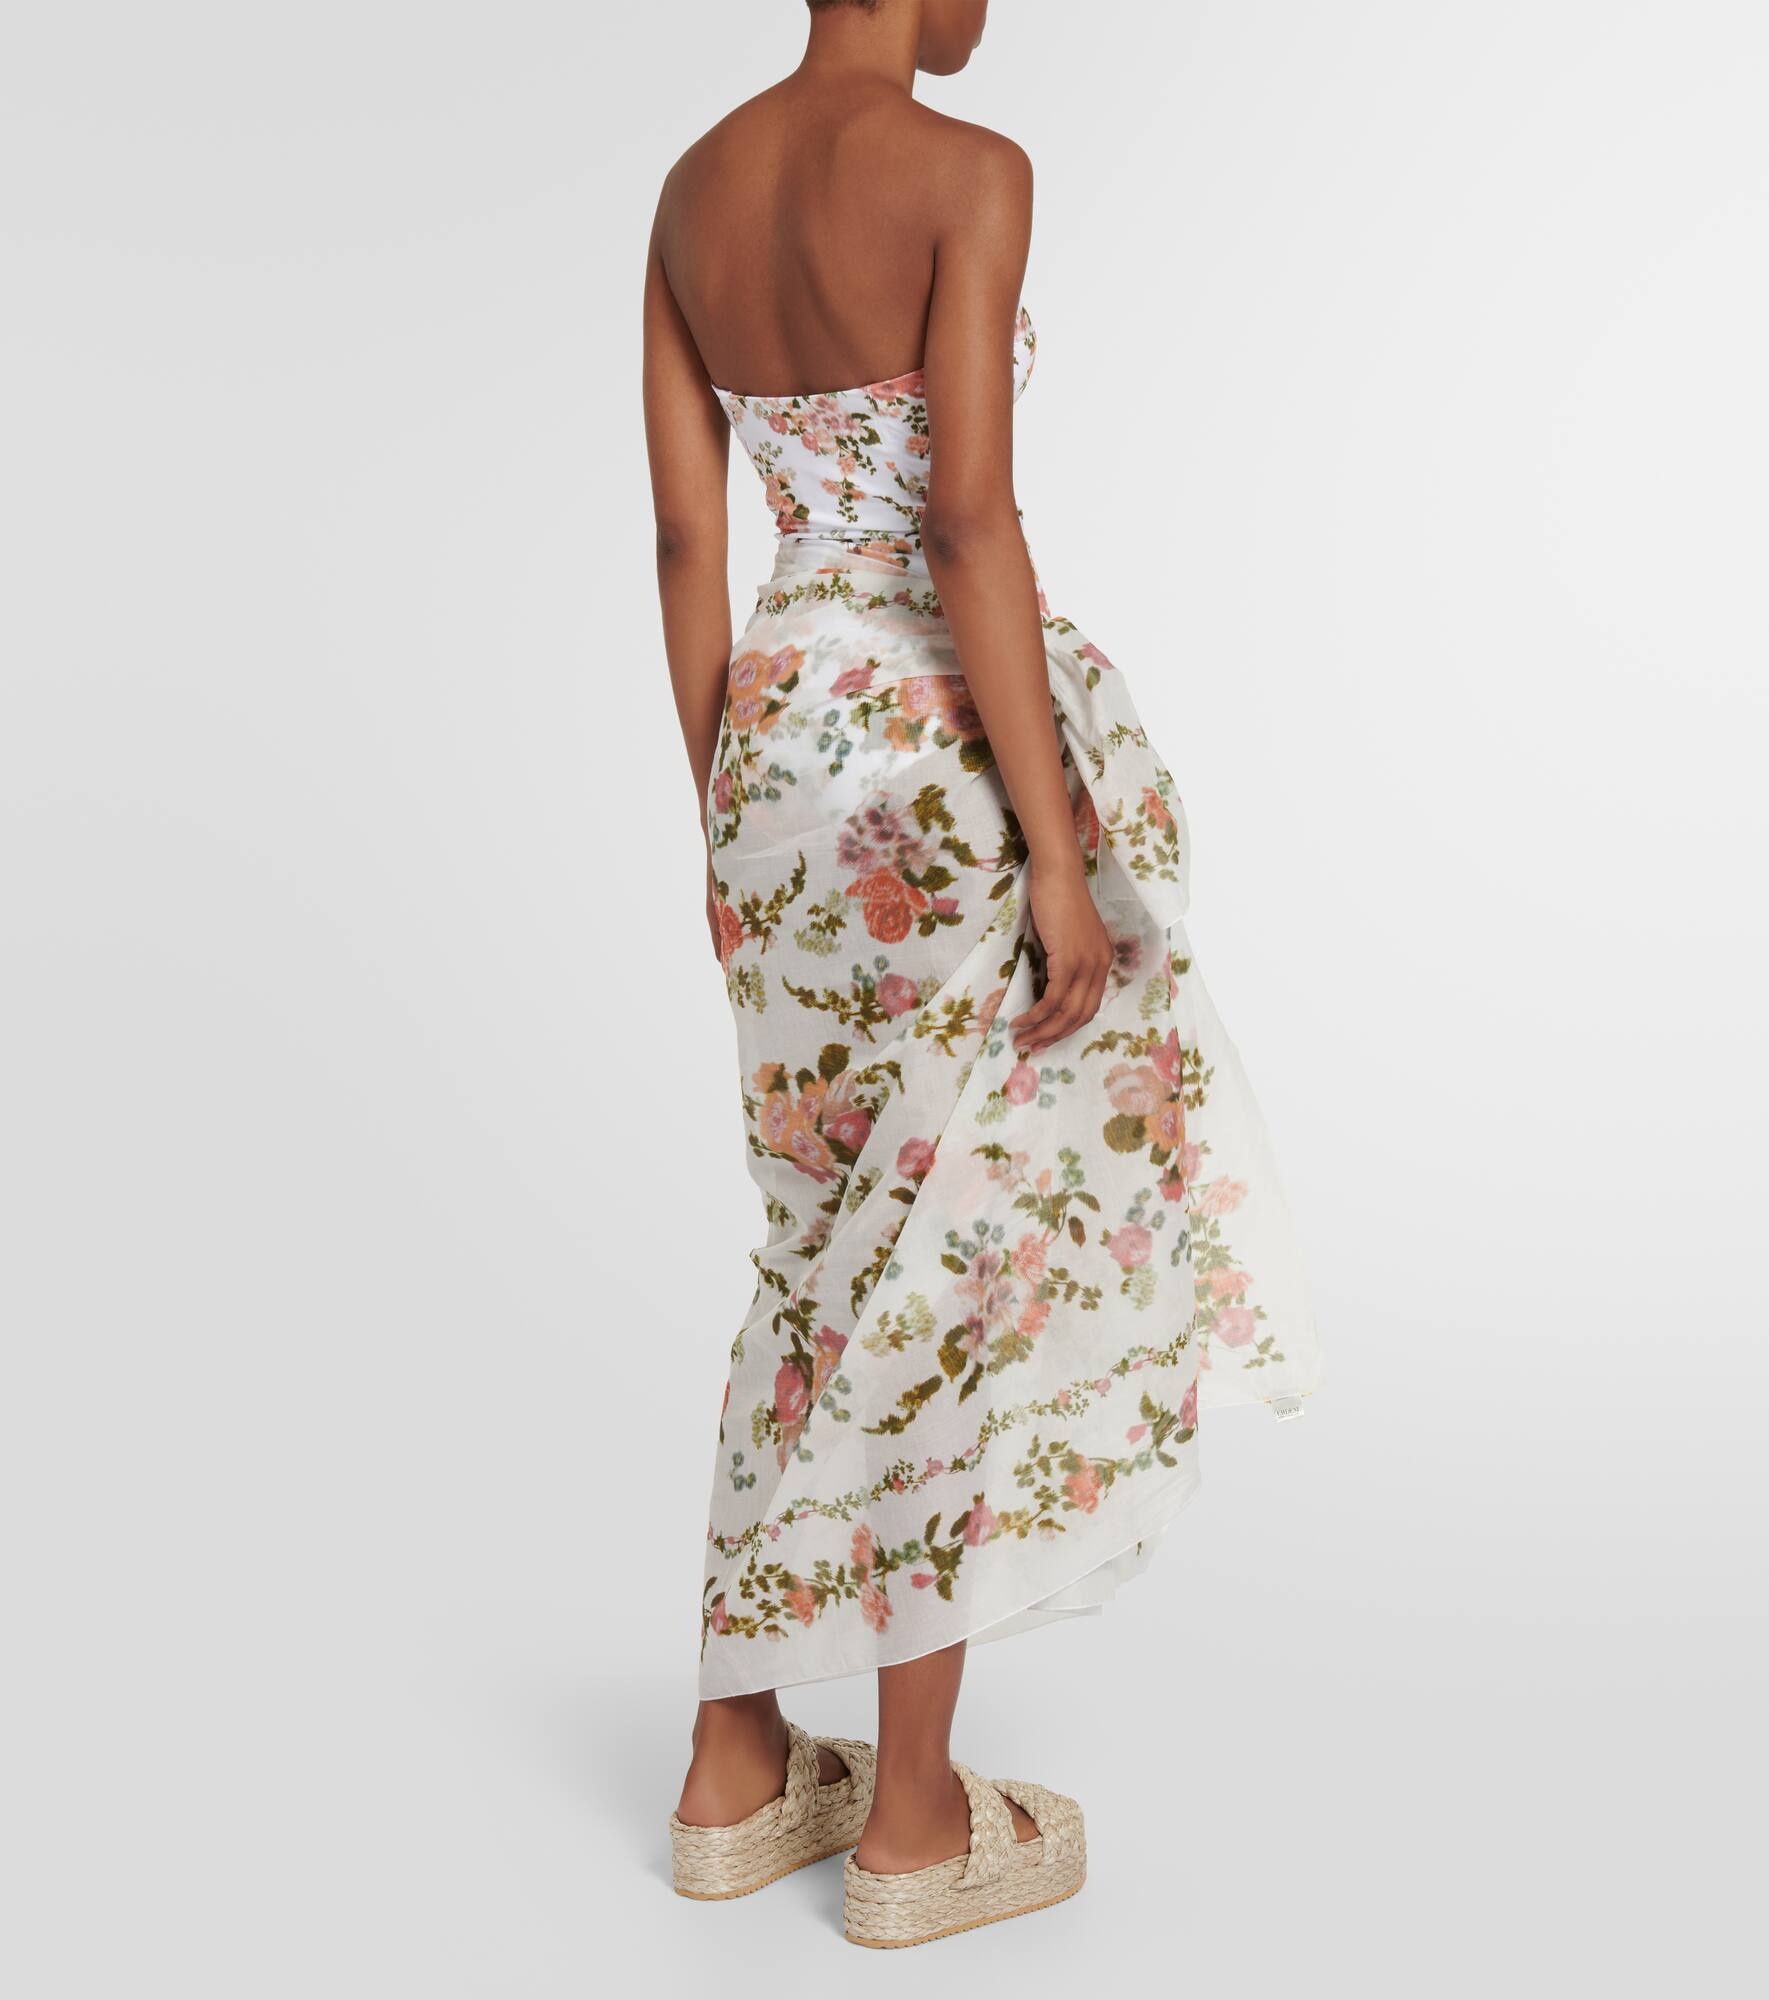 Floral cotton voile beach cover-up - 3